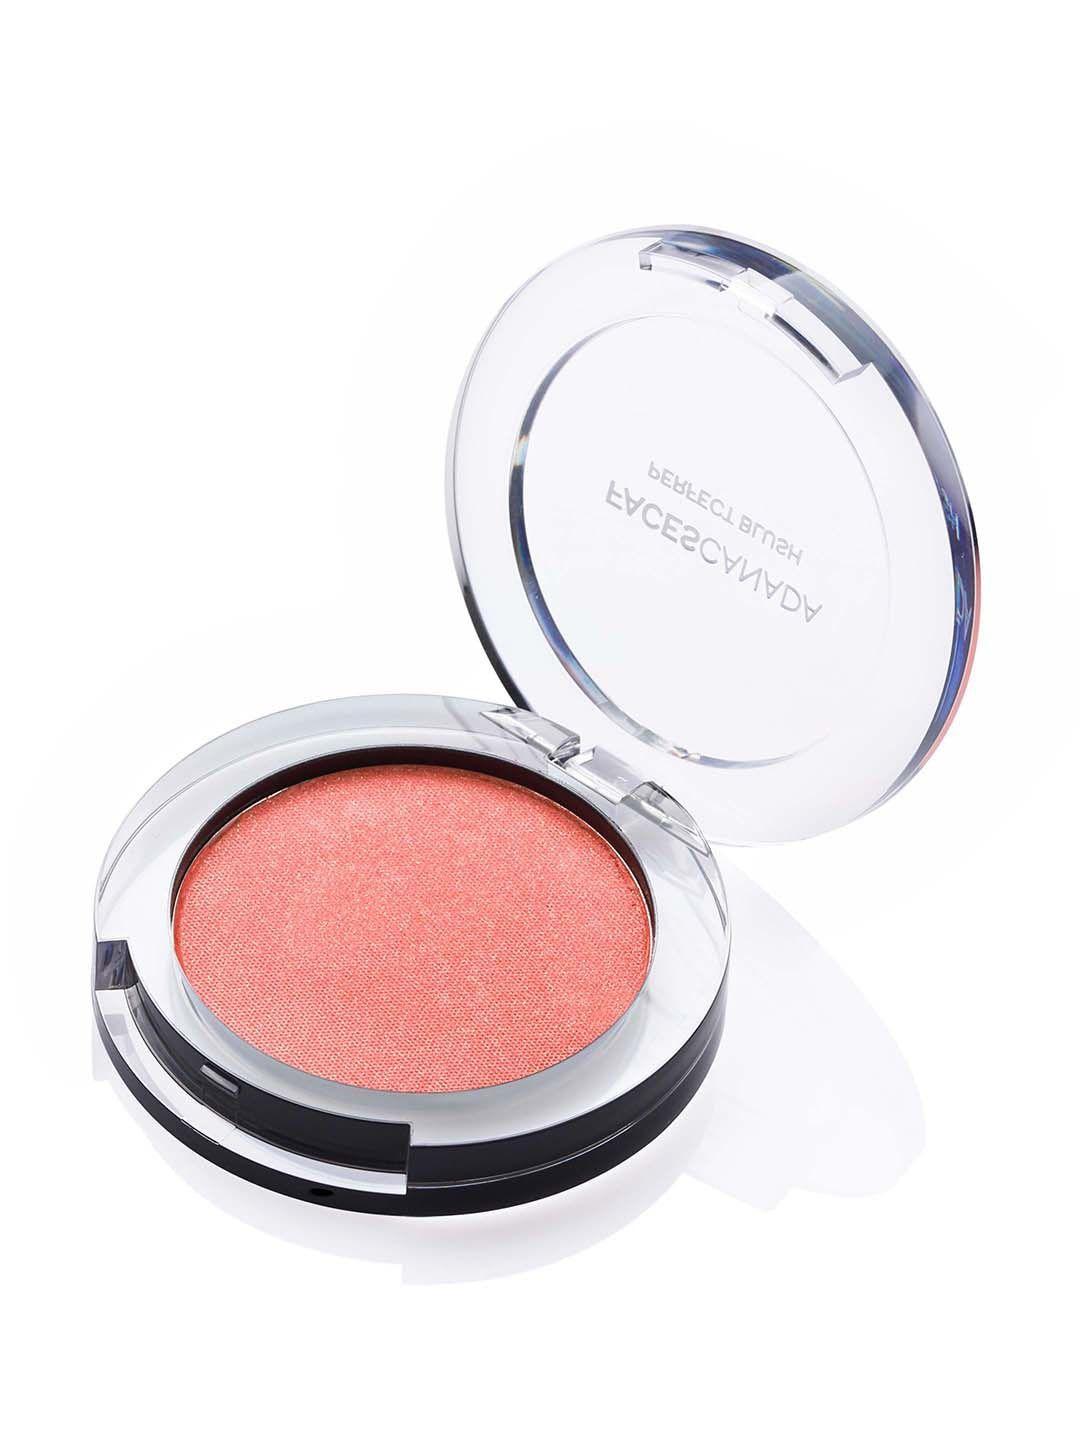 faces canada perfect blush - silky smooth texture - 5g - apricot 06